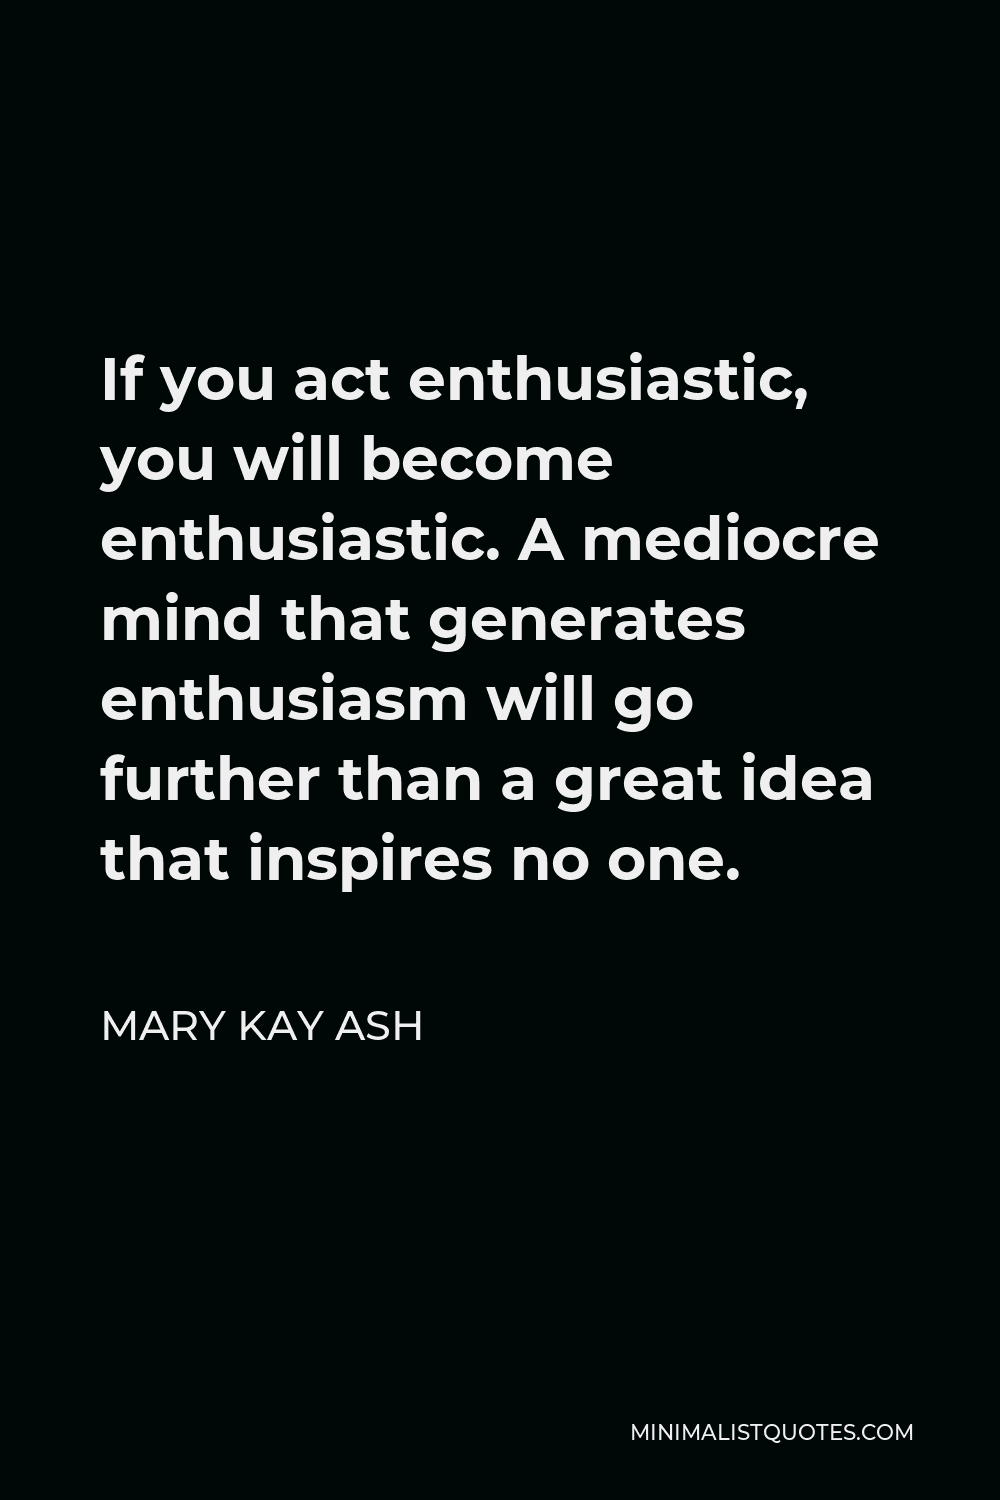 Mary Kay Ash Quote - If you act enthusiastic, you will become enthusiastic. A mediocre mind that generates enthusiasm will go further than a great idea that inspires no one.